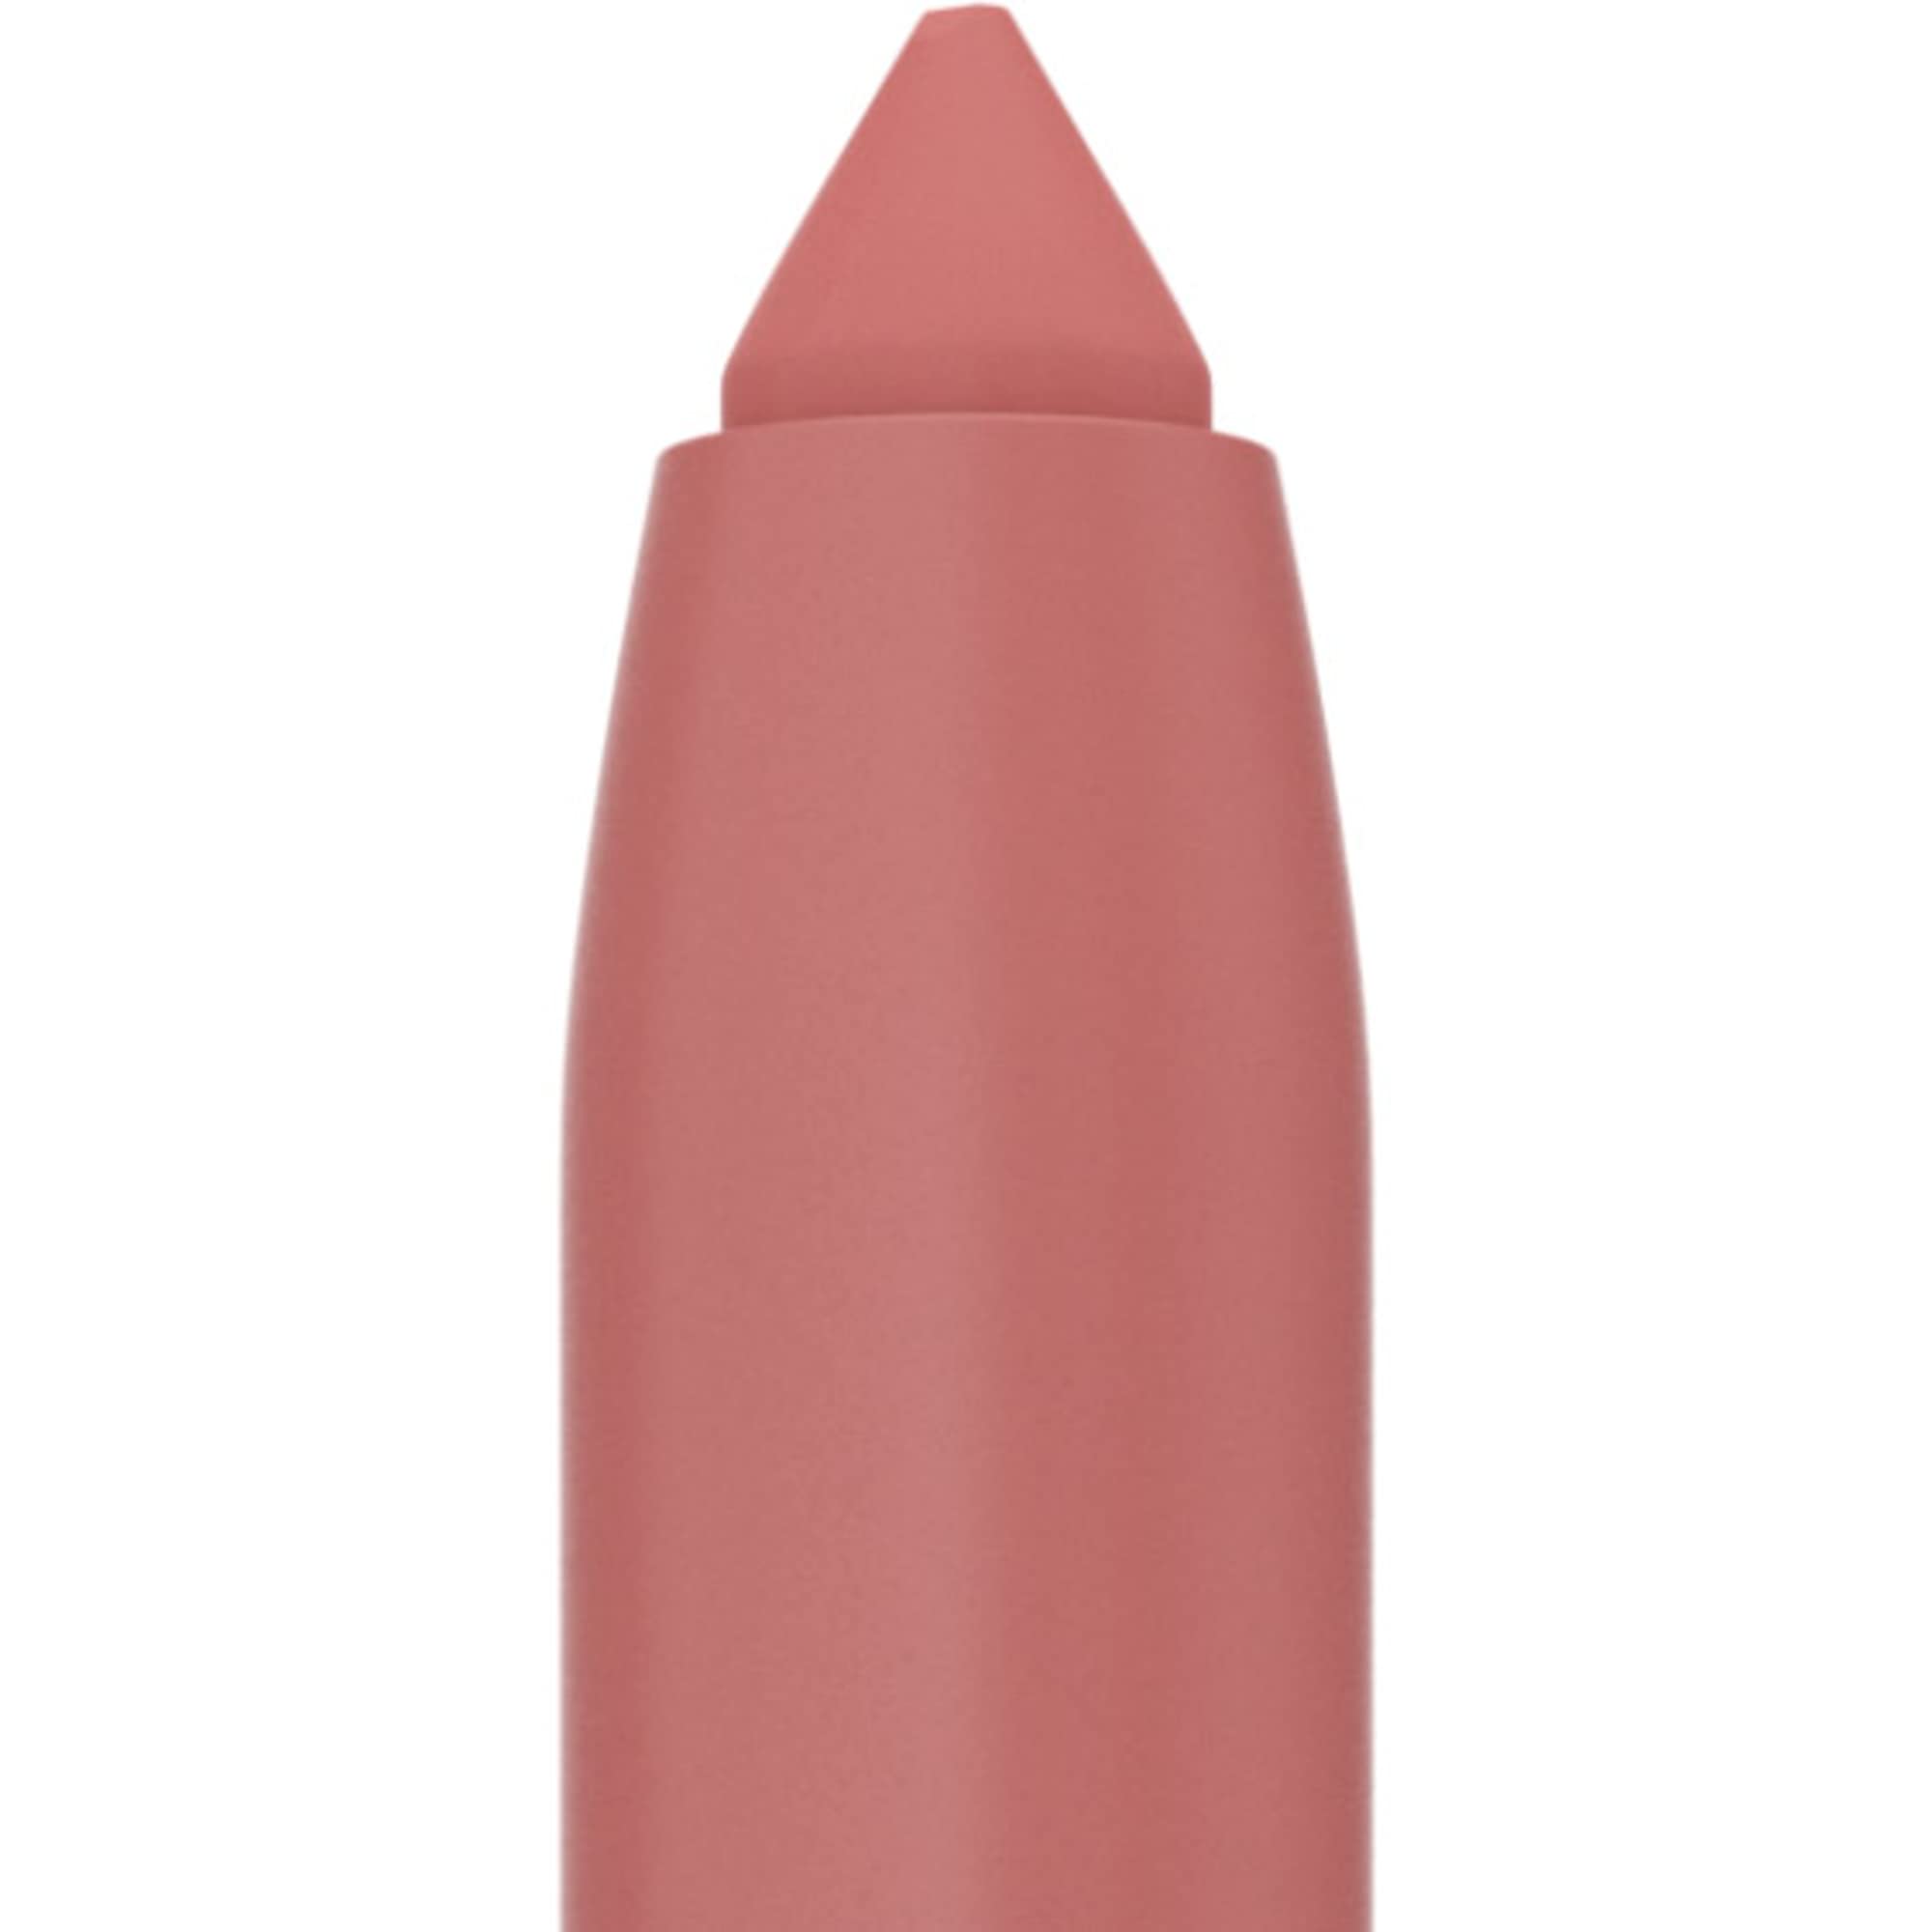 MAYBELLINE New York Super Stay Ink Crayon Lipstick Makeup, Precision Tip Matte Lip Crayon with Built-in Sharpener, Longwear Up To 8Hrs, Achieve It All, Brown Nude, 1 Count